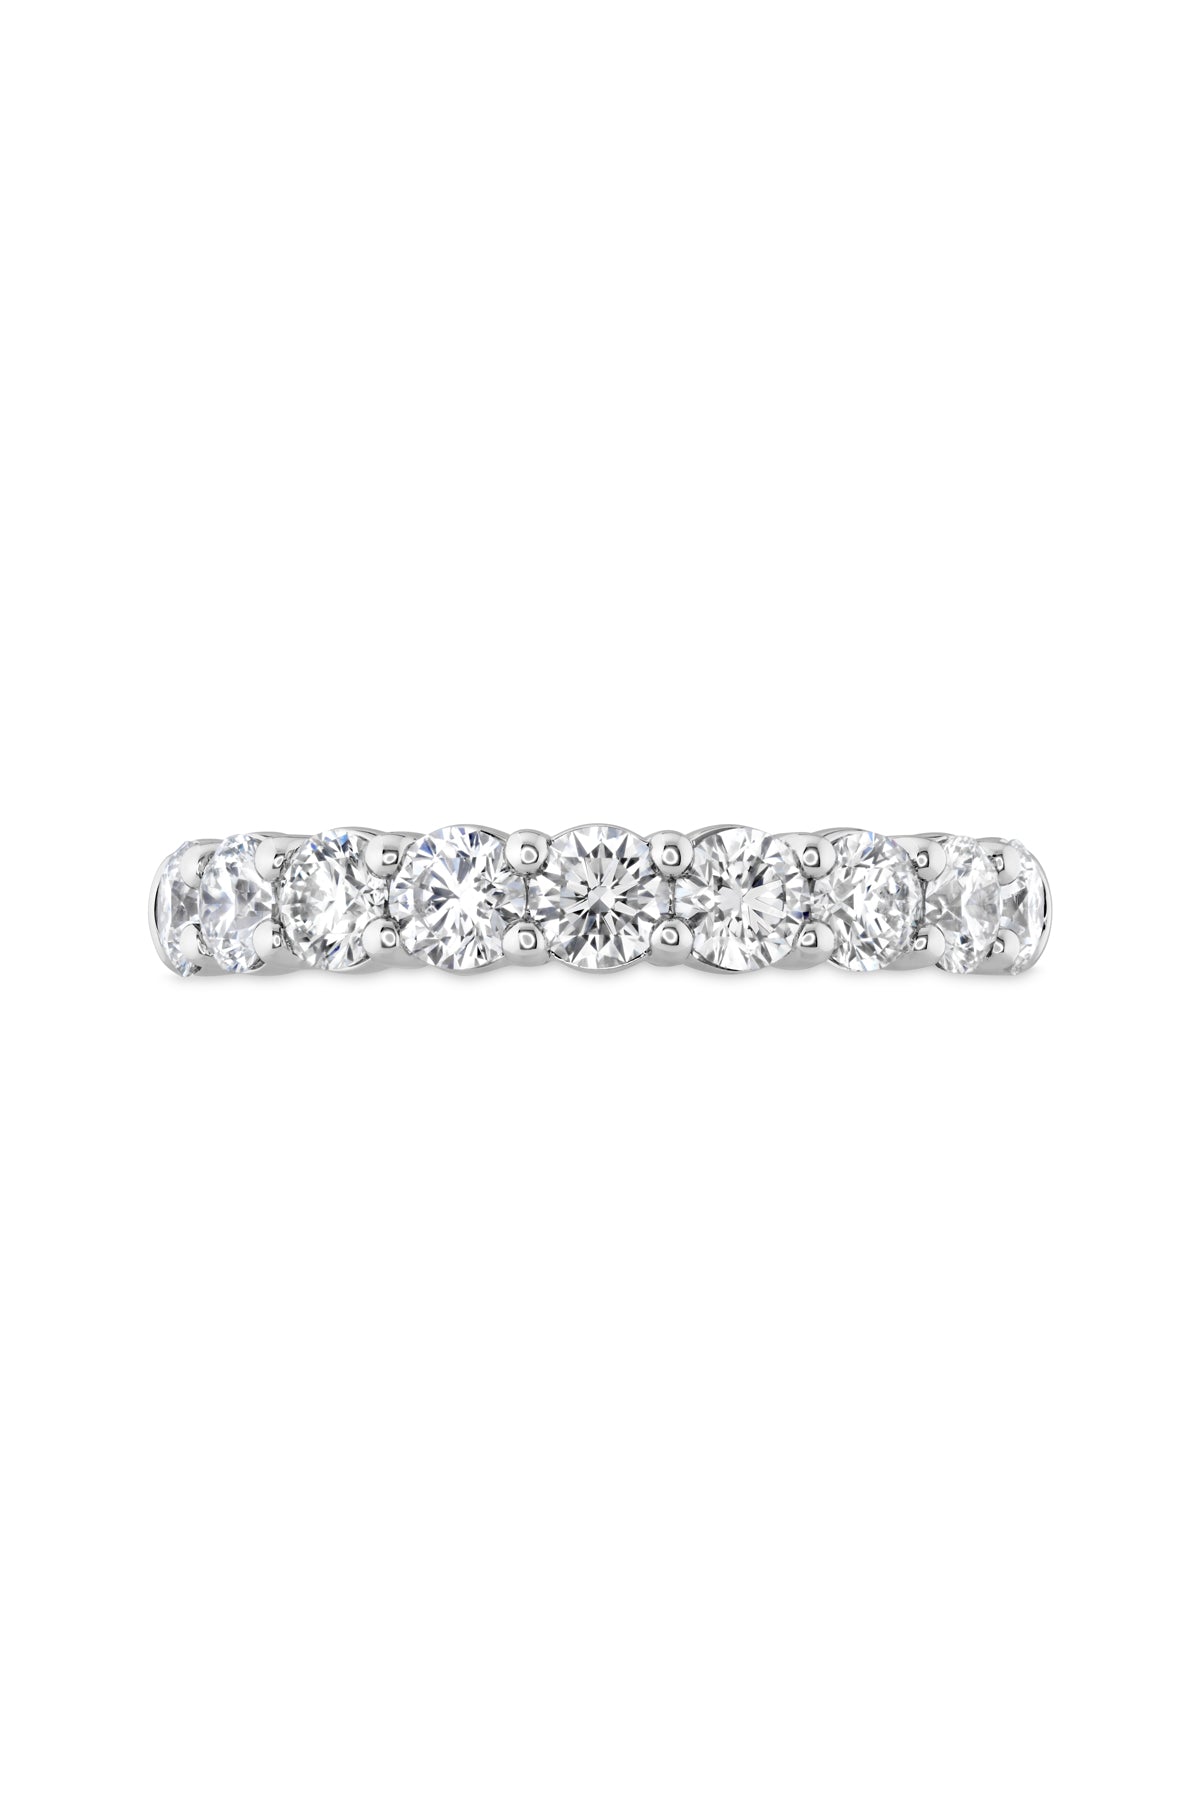 Signature 9 Stone Band From Hearts On Fire available at LeGassick Diamonds and Jewellery Gold Coast, Australia.